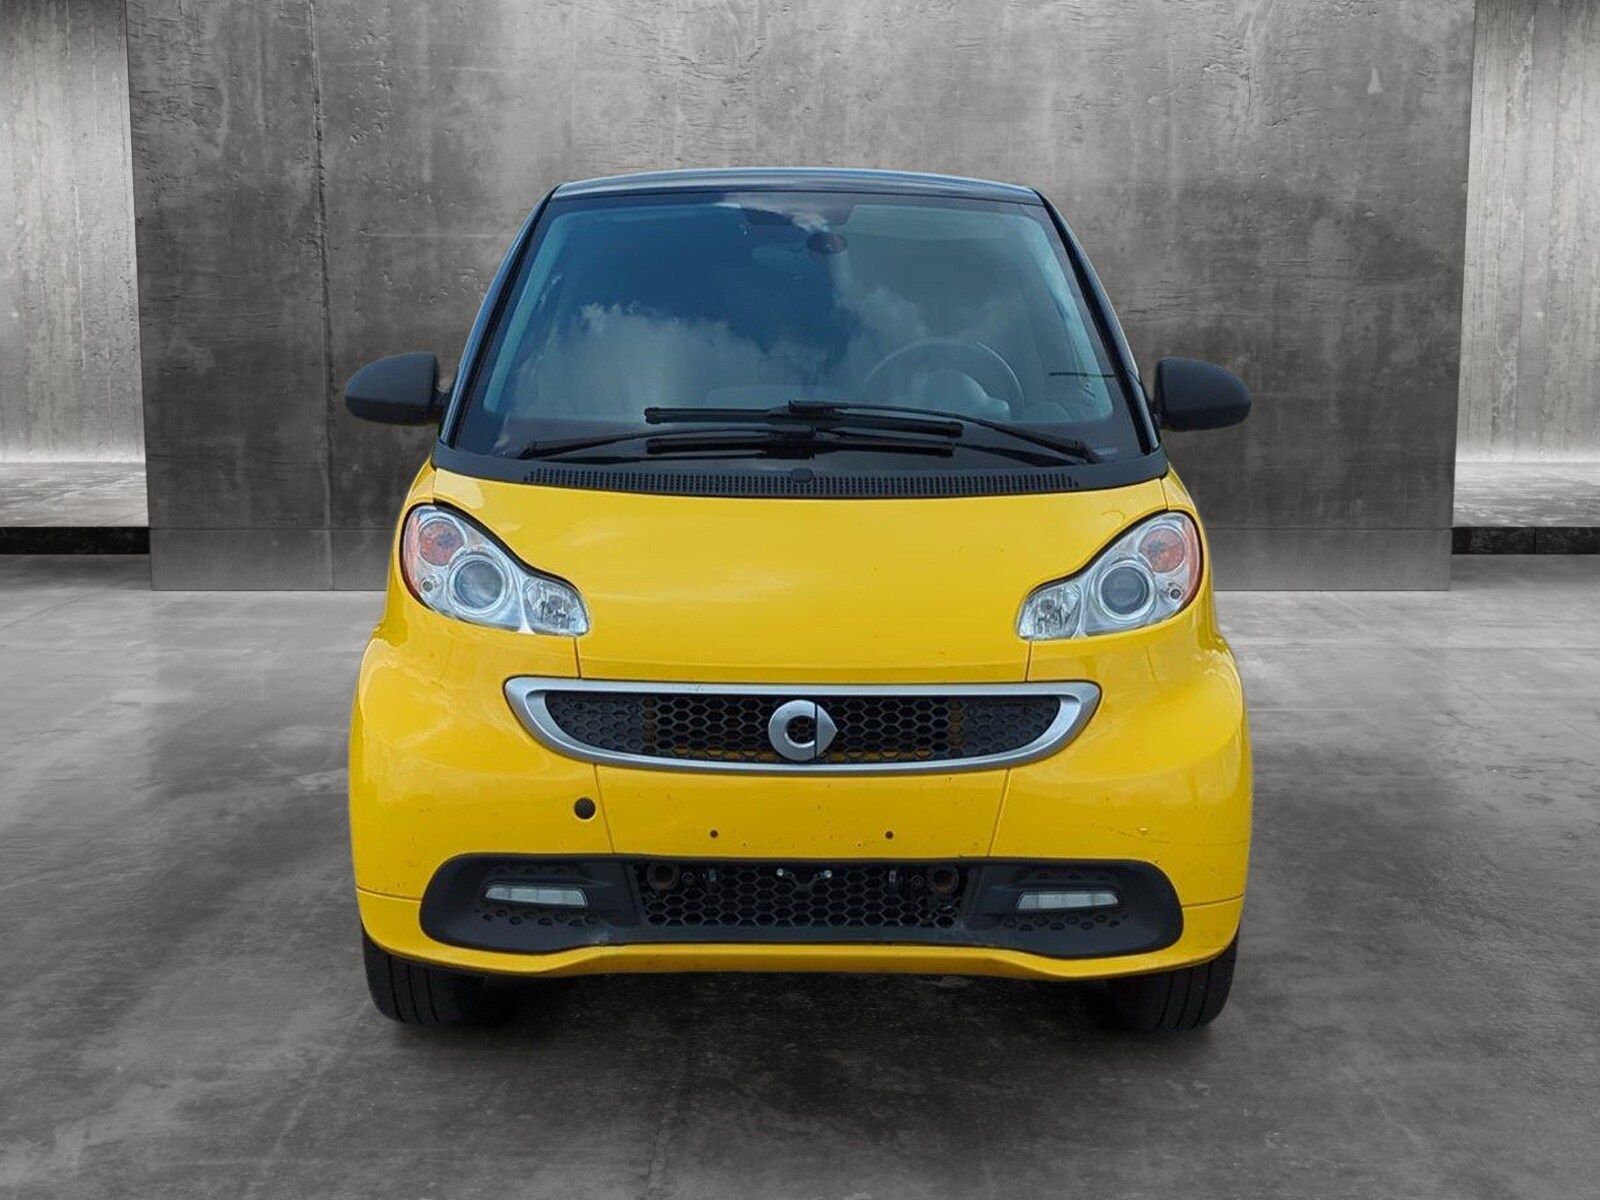 Used 2015 smart fortwo pure with VIN WMEEJ3BA2FK798137 for sale in Memphis, TN